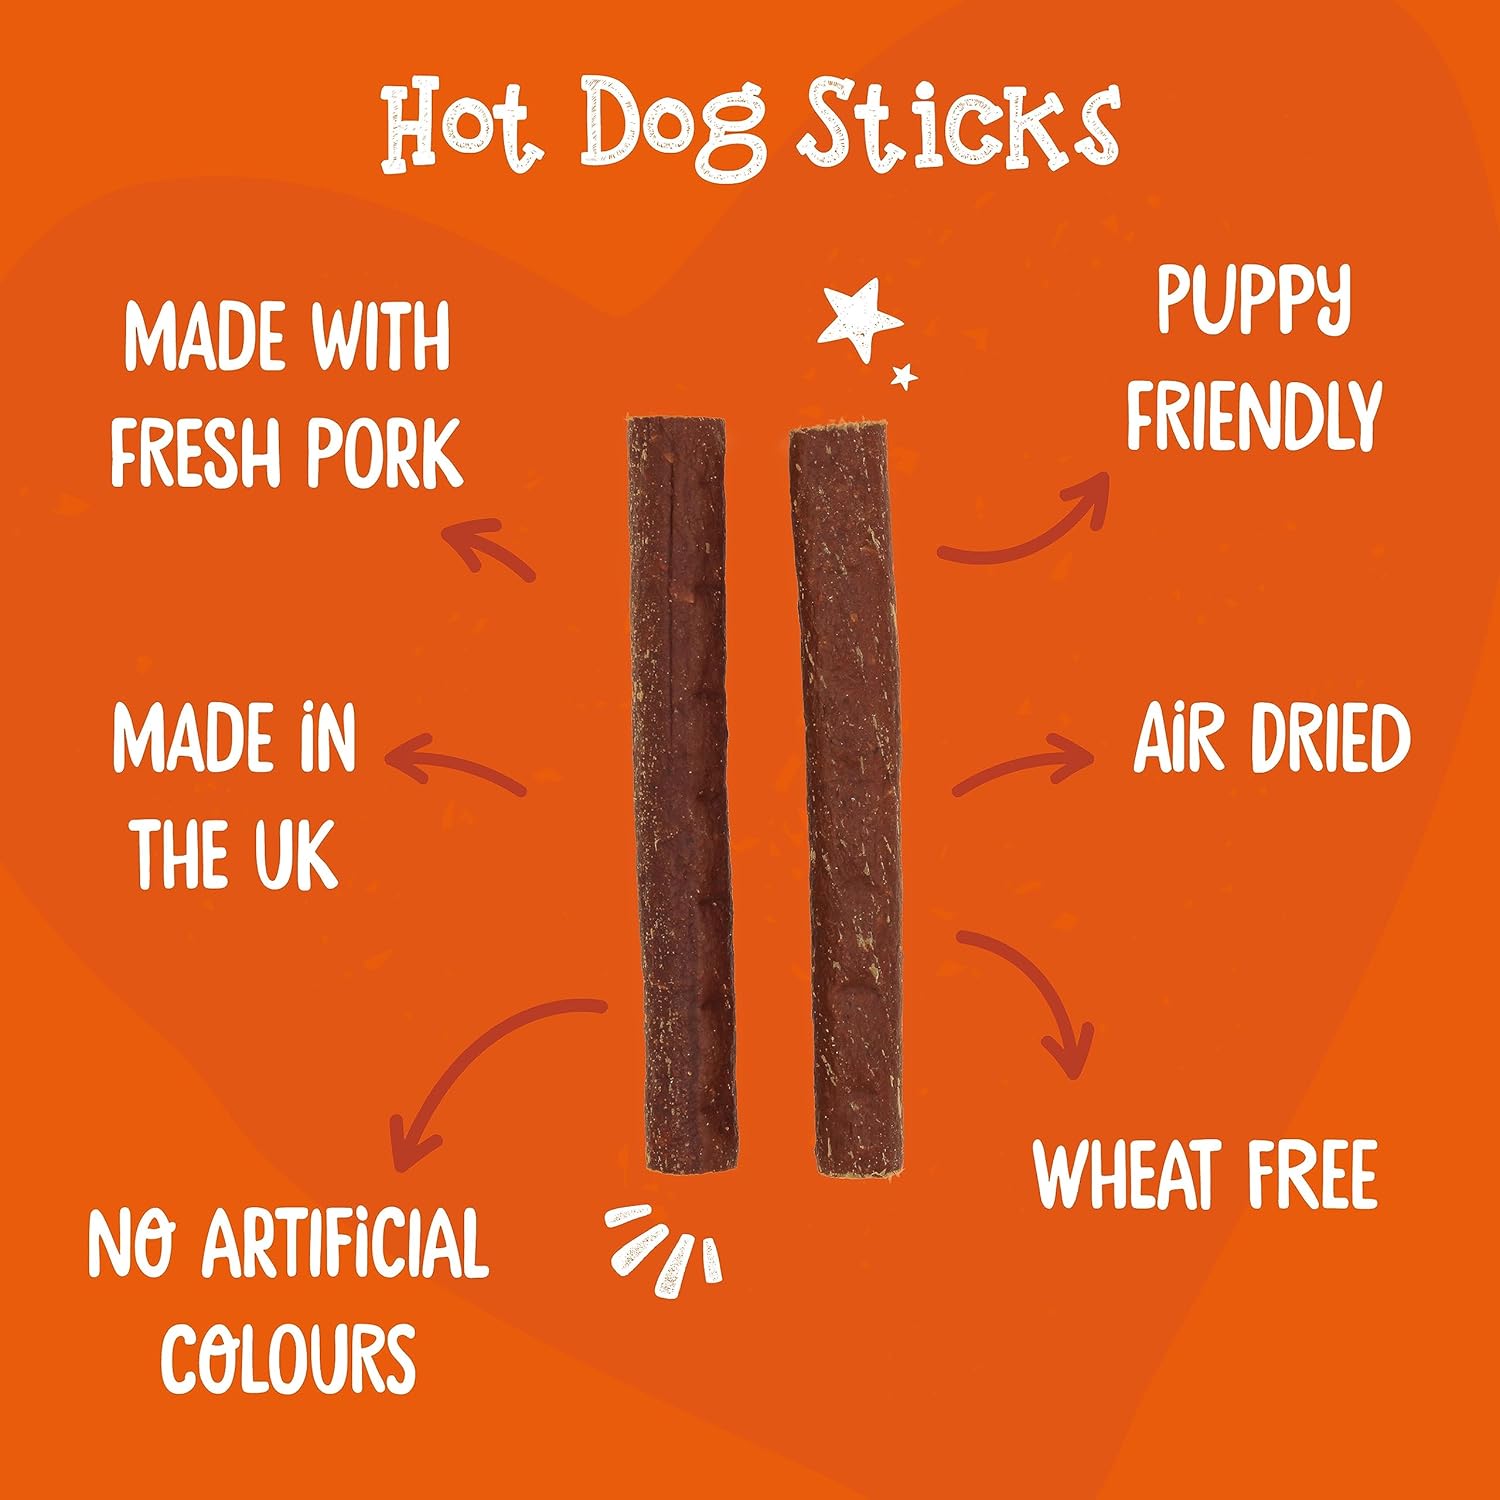 Webbox Hot Dog Sticks Dog Treats - Made with Fresh Pork, Puppy Friendly, Wheat Free Recipe, No Artificial Flavours, Made in the UK (16 x 4 Packs) :Pet Supplies